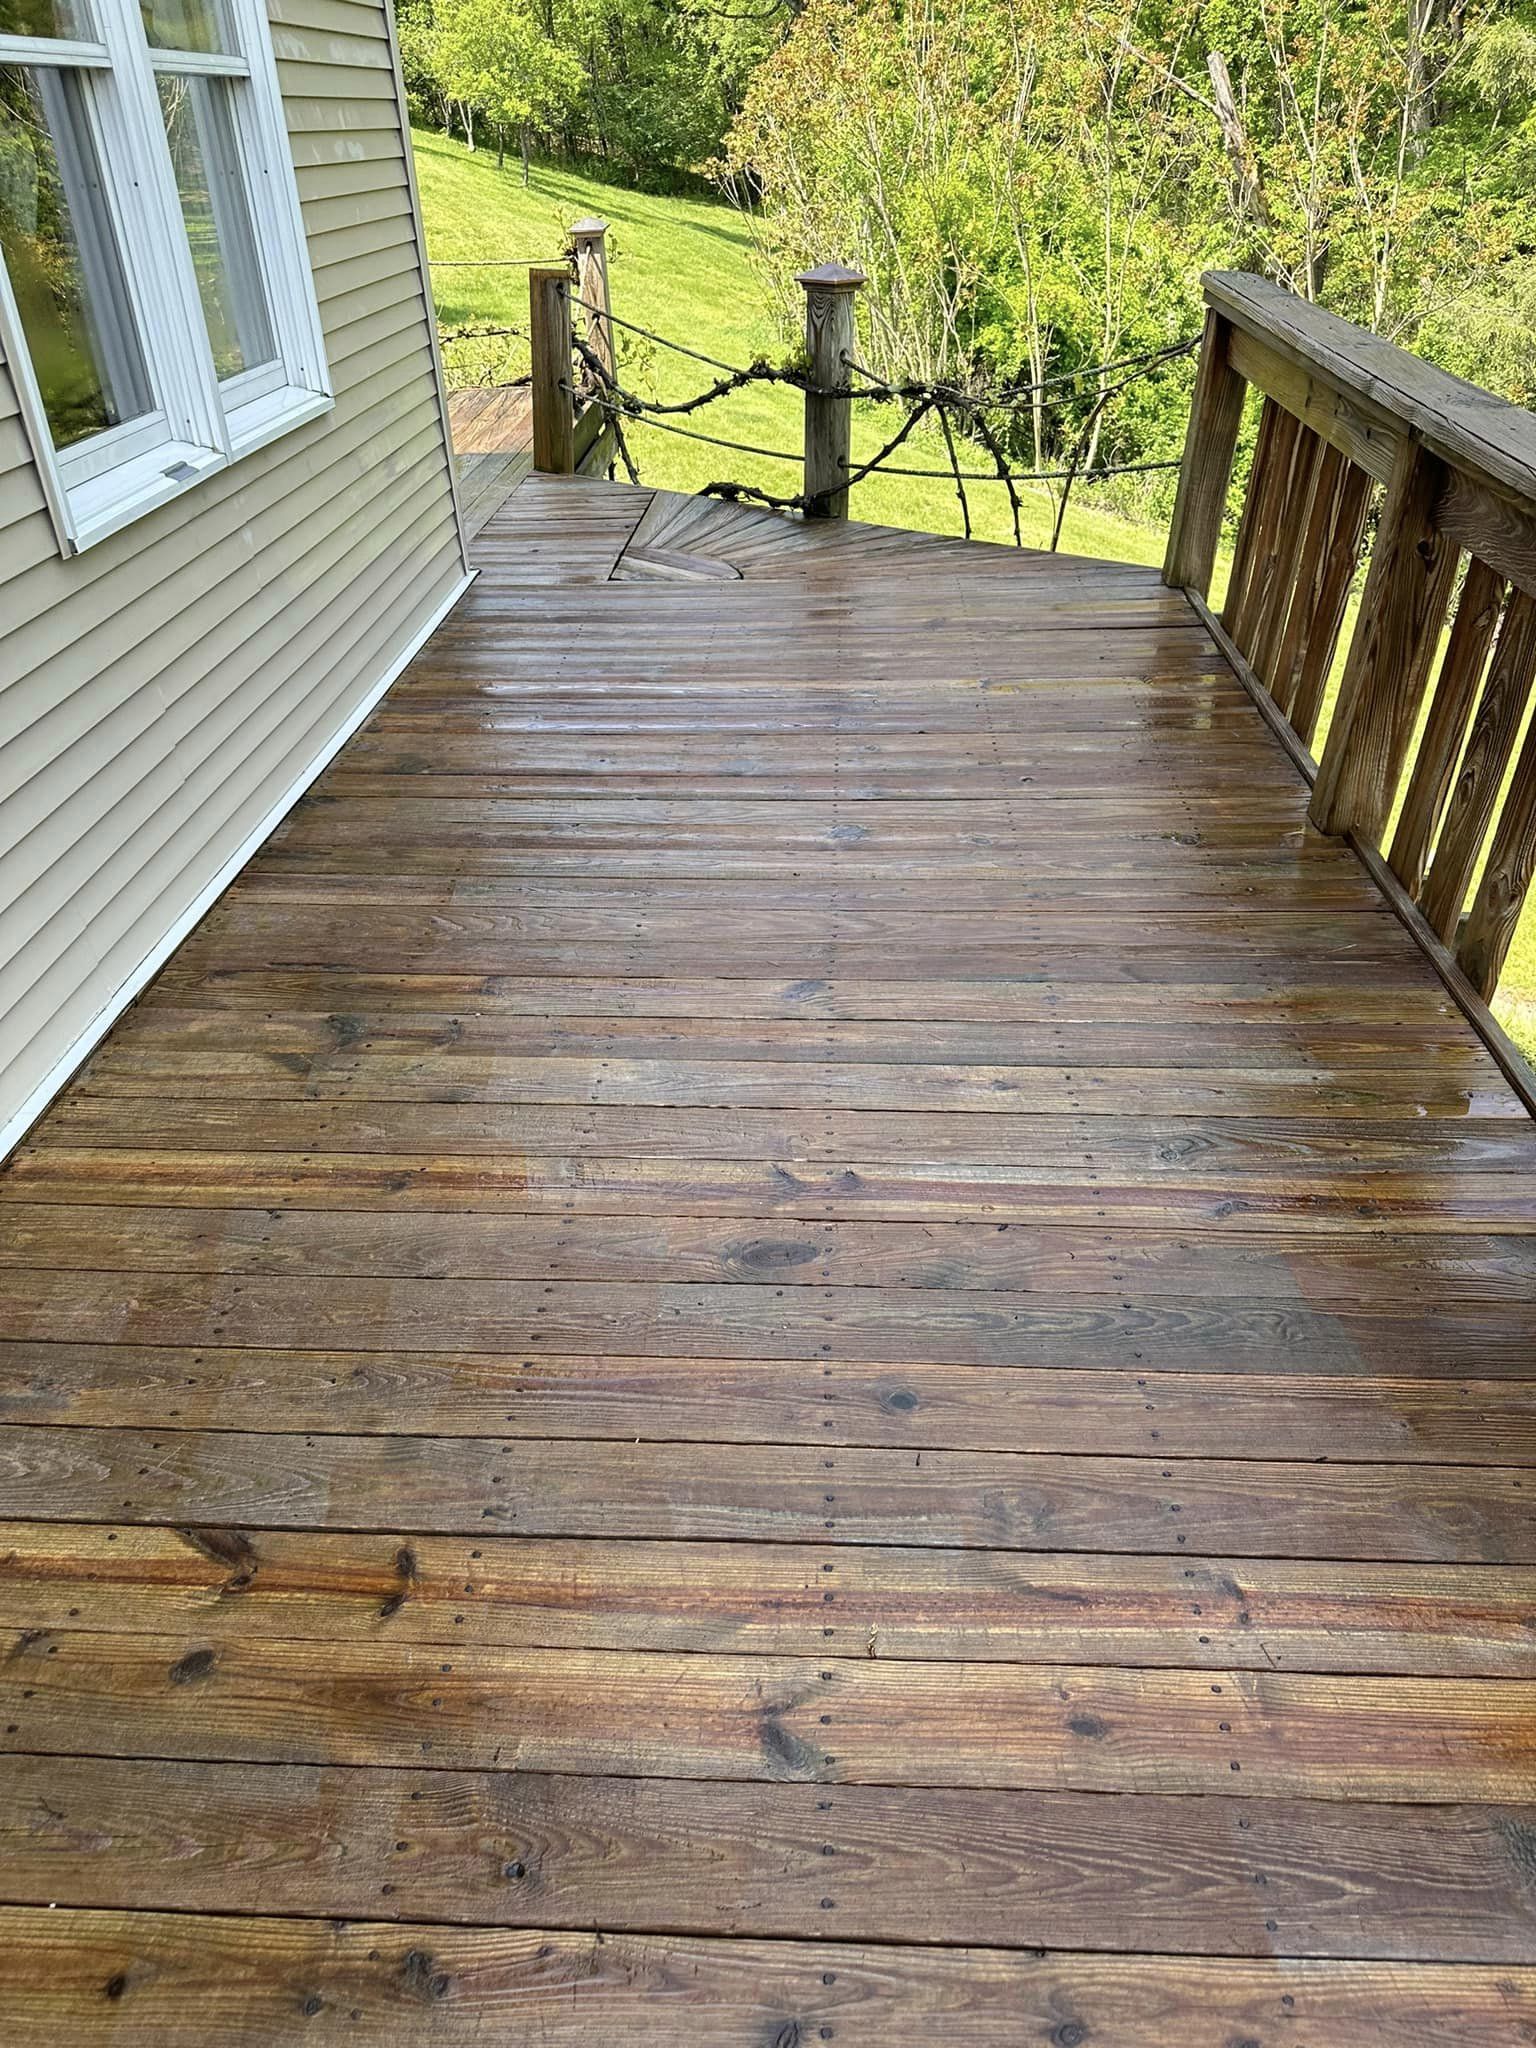 Expert pressure washing services for fence and deck cleaning in Selinsgrove PA by NextGen Power Wash LLC